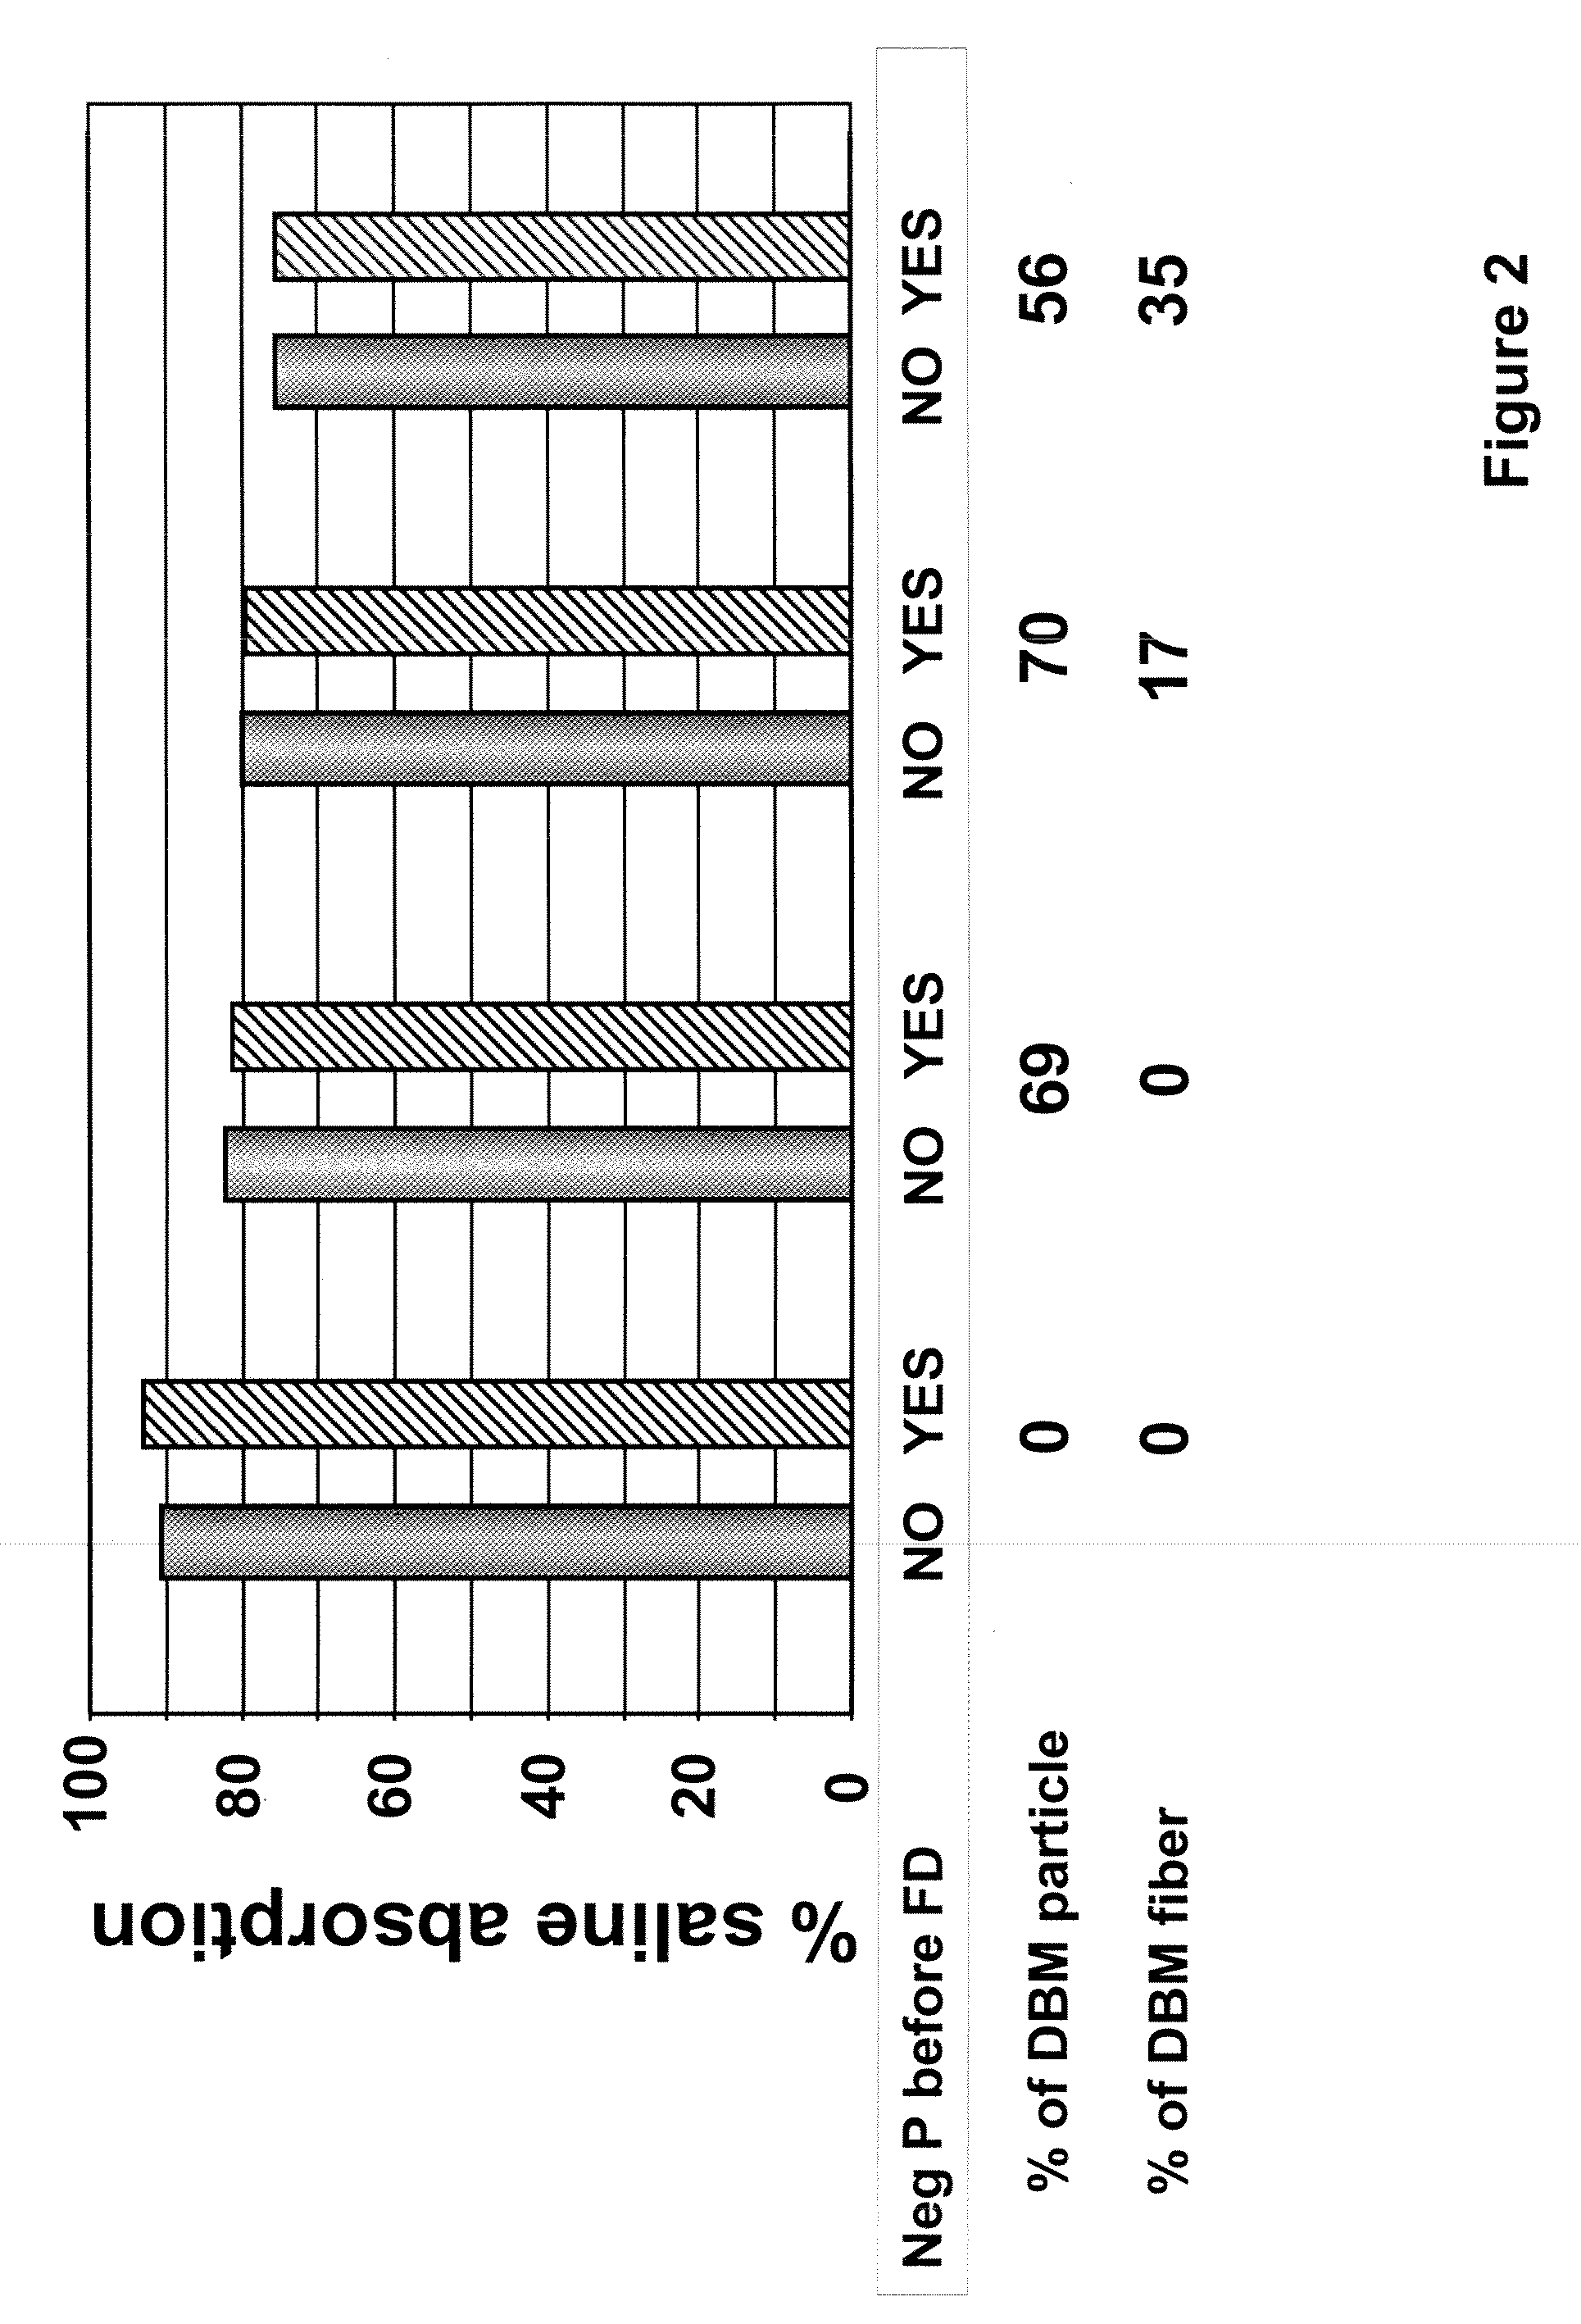 Composition for a Tissue Repair Implant and Methods of Making the Same